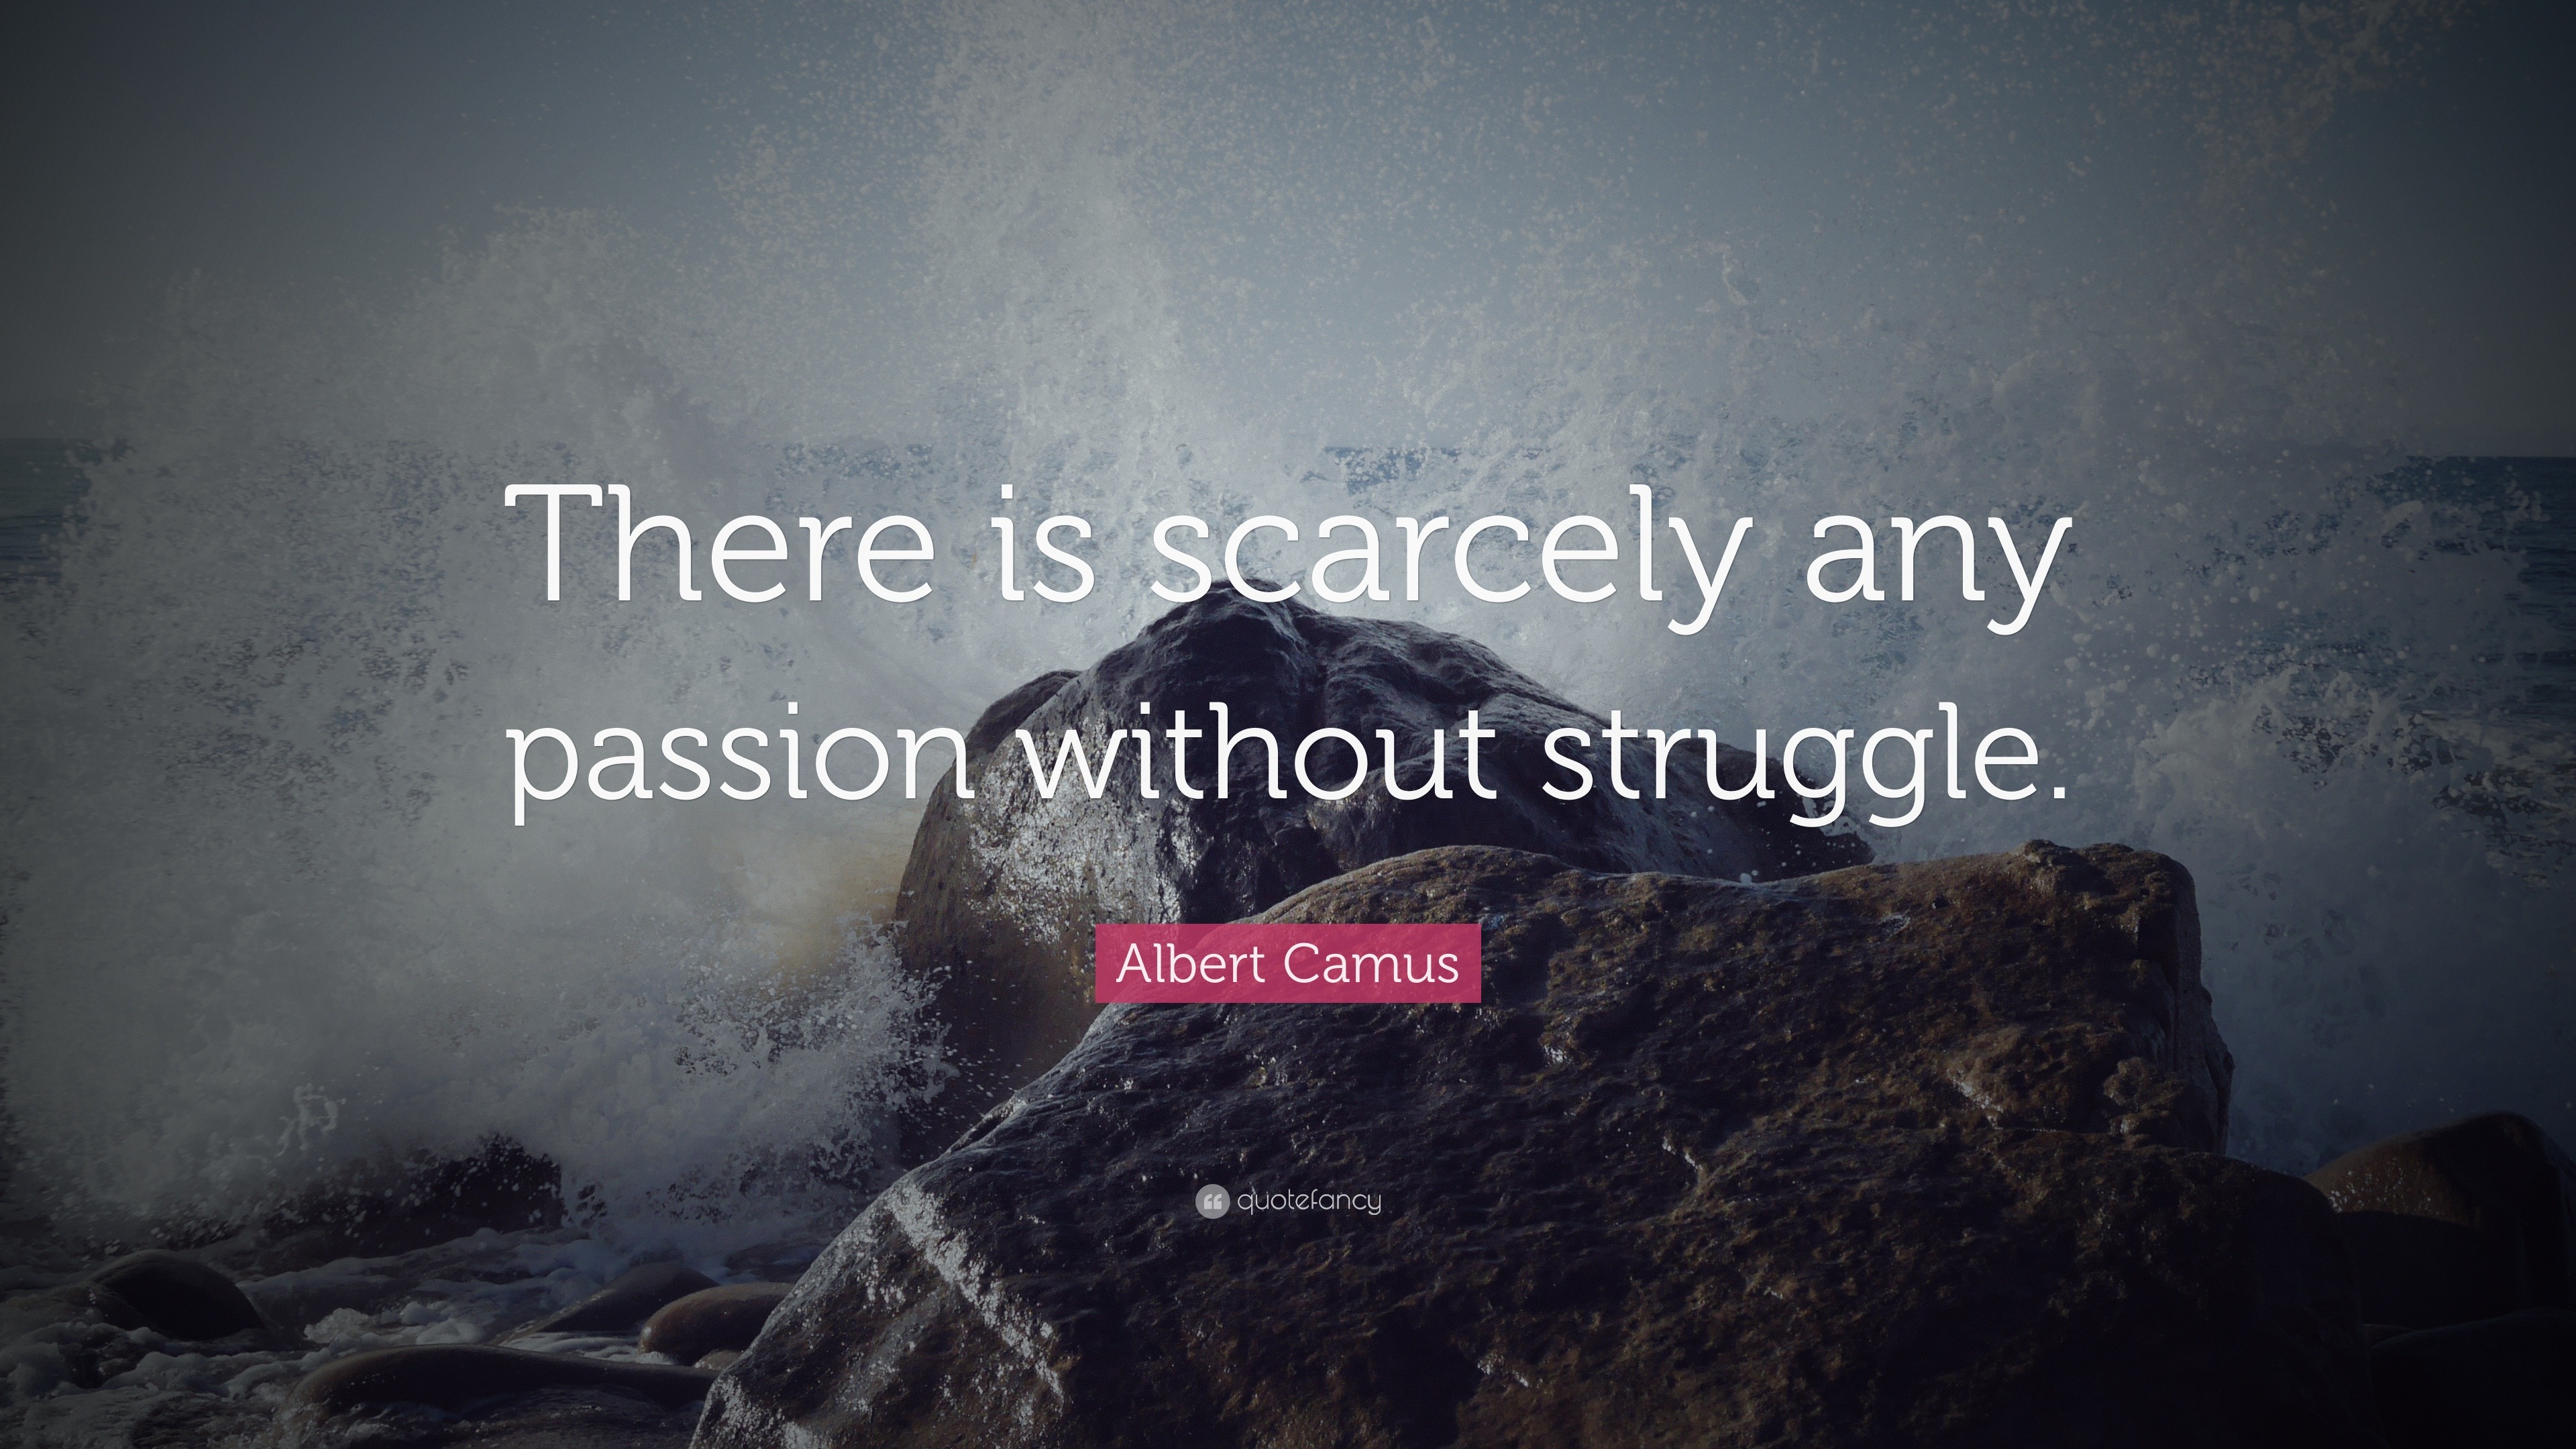 Albert Camus Quote: “There is scarcely any passion without struggle